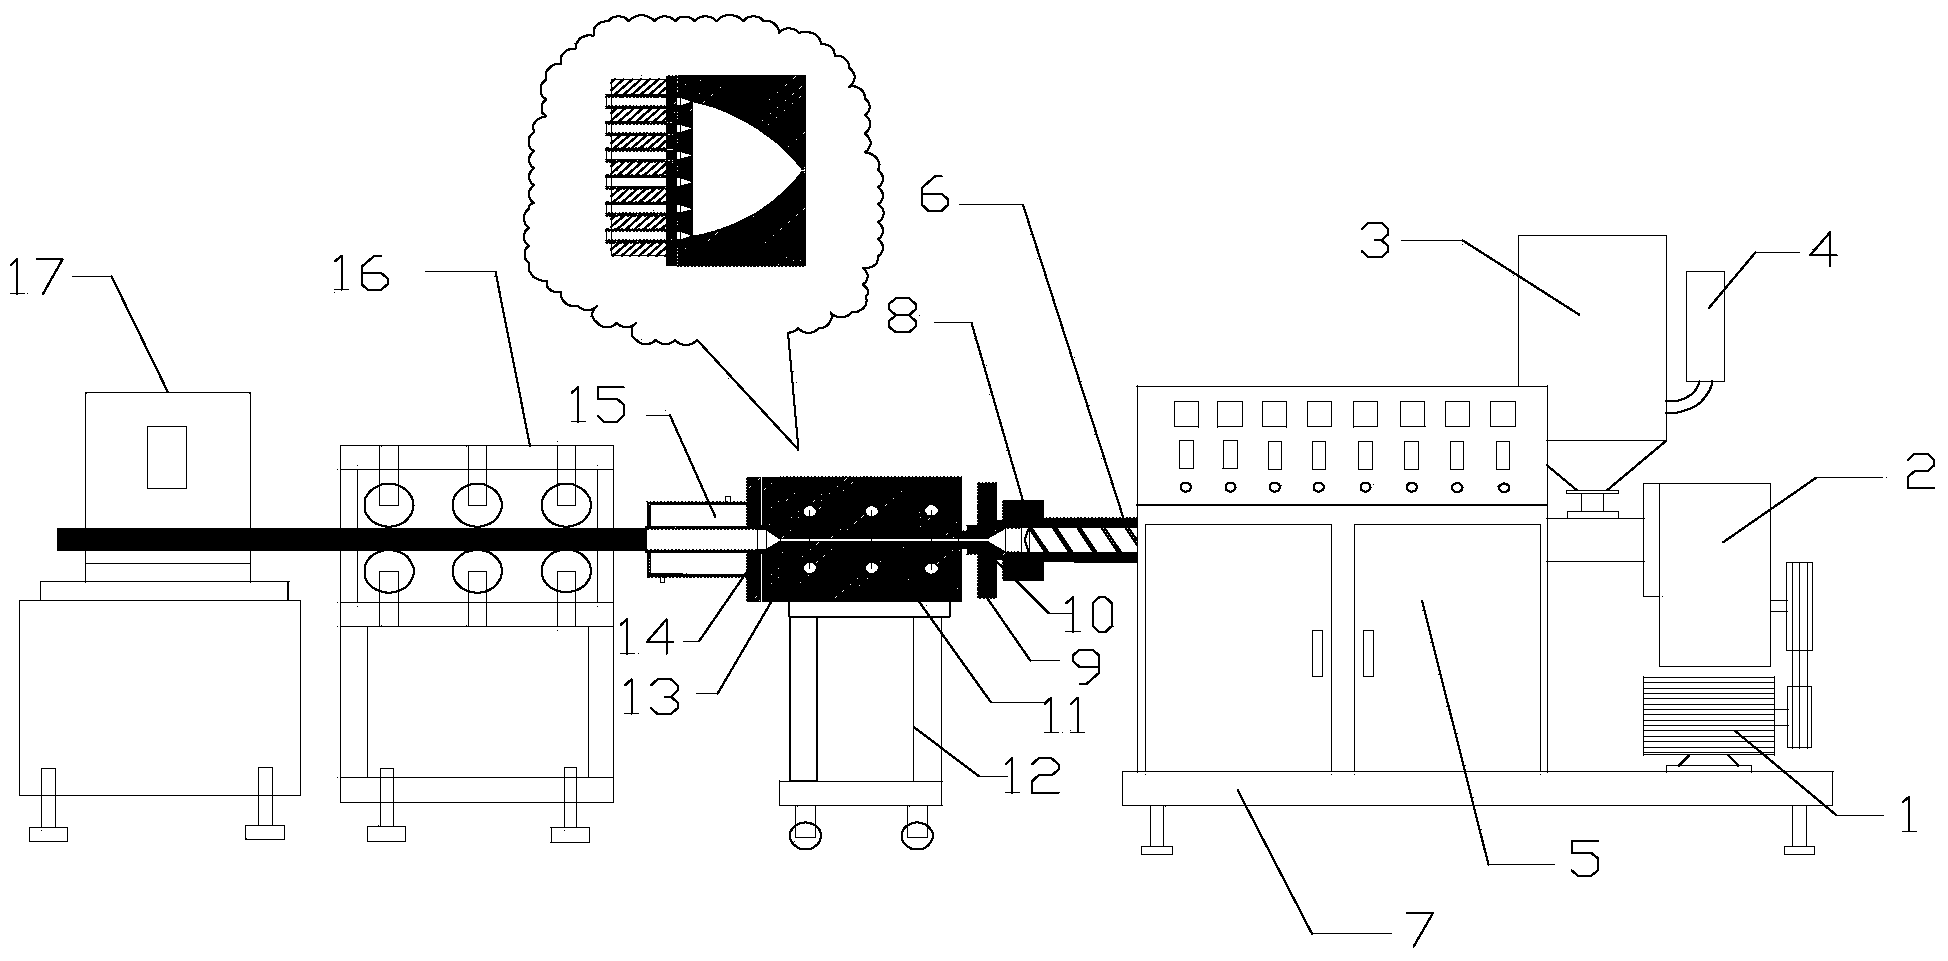 PEEK plastic rod production device and process